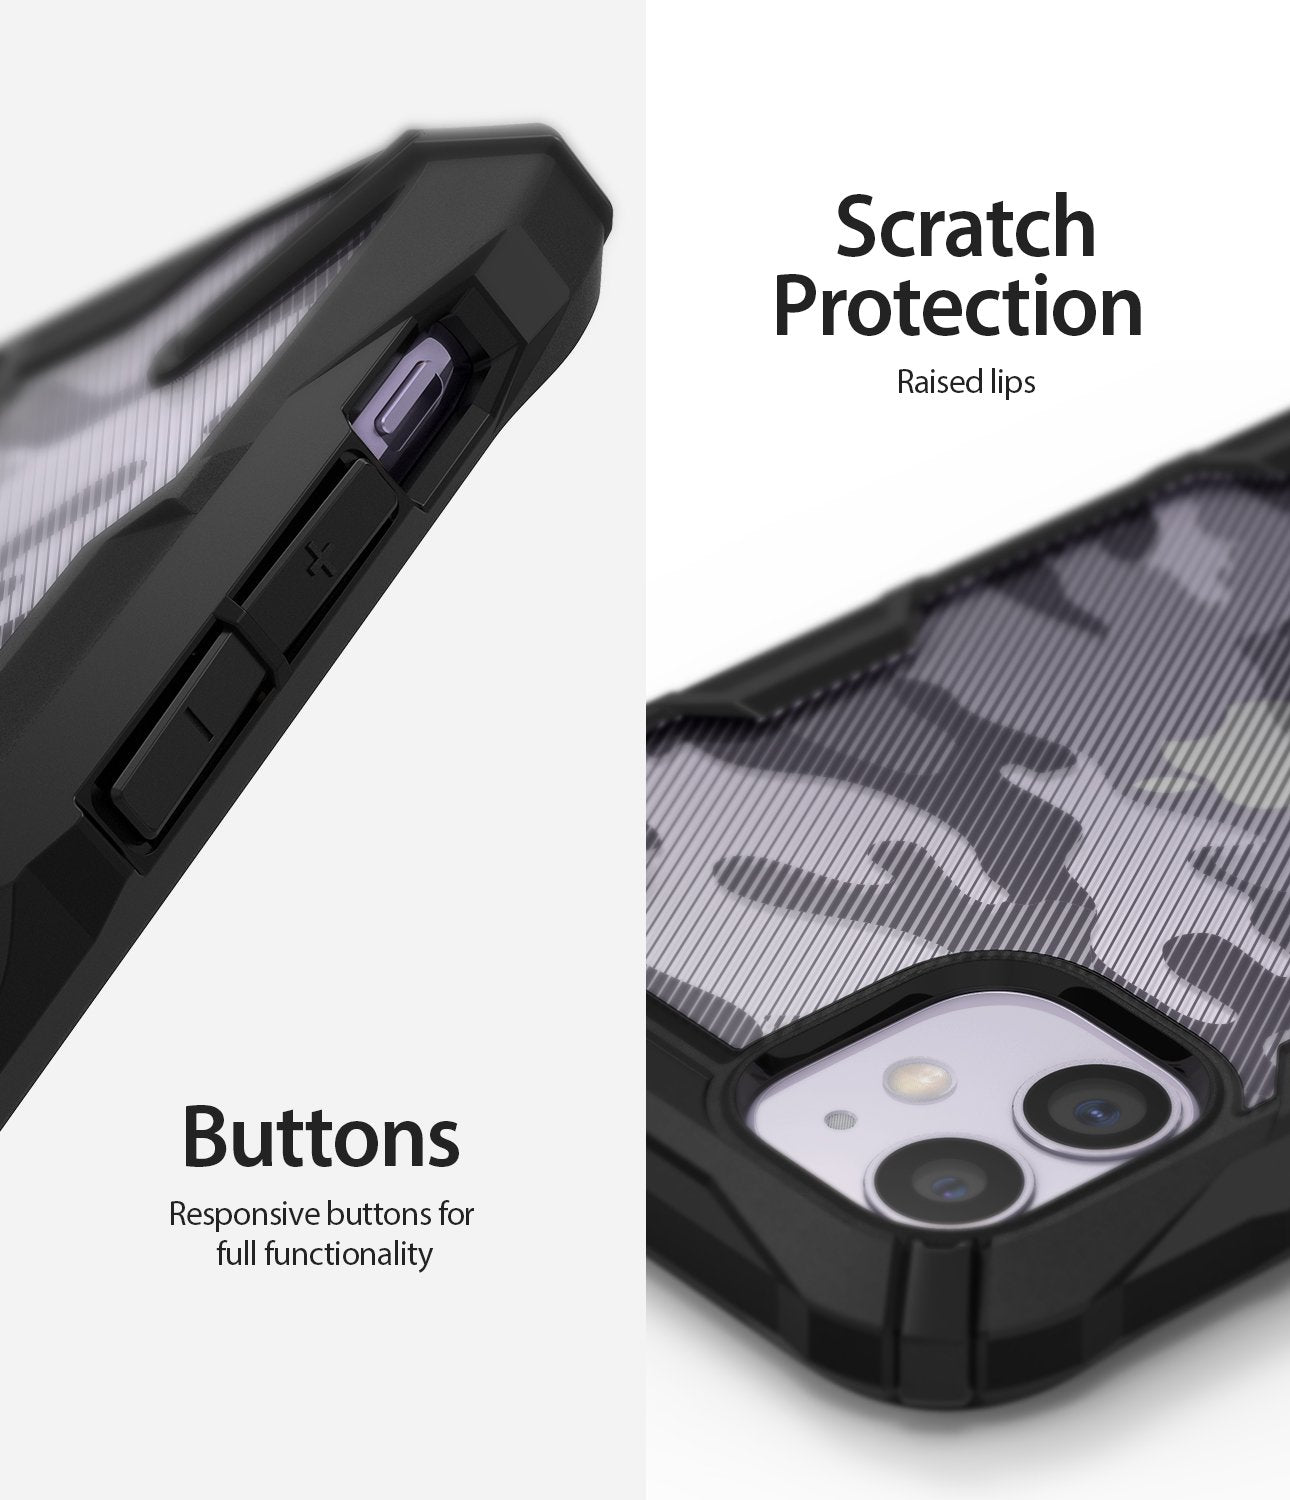 Ringke Fusion X Design Case Compatible with iPhone 11 Case Camo Black Scratch Protection buttons